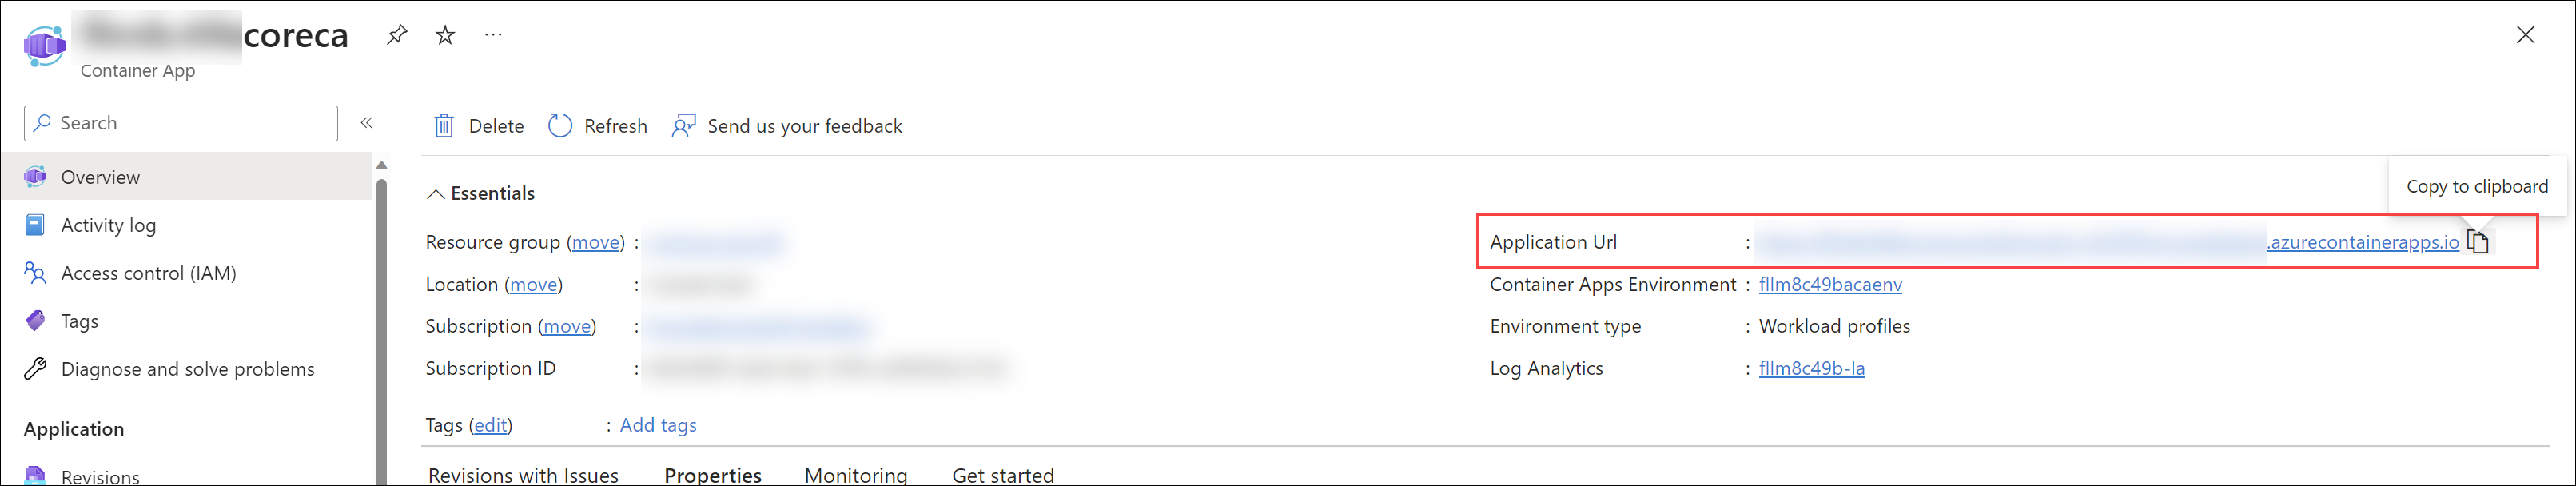 The container app's Application Url is highlighted.